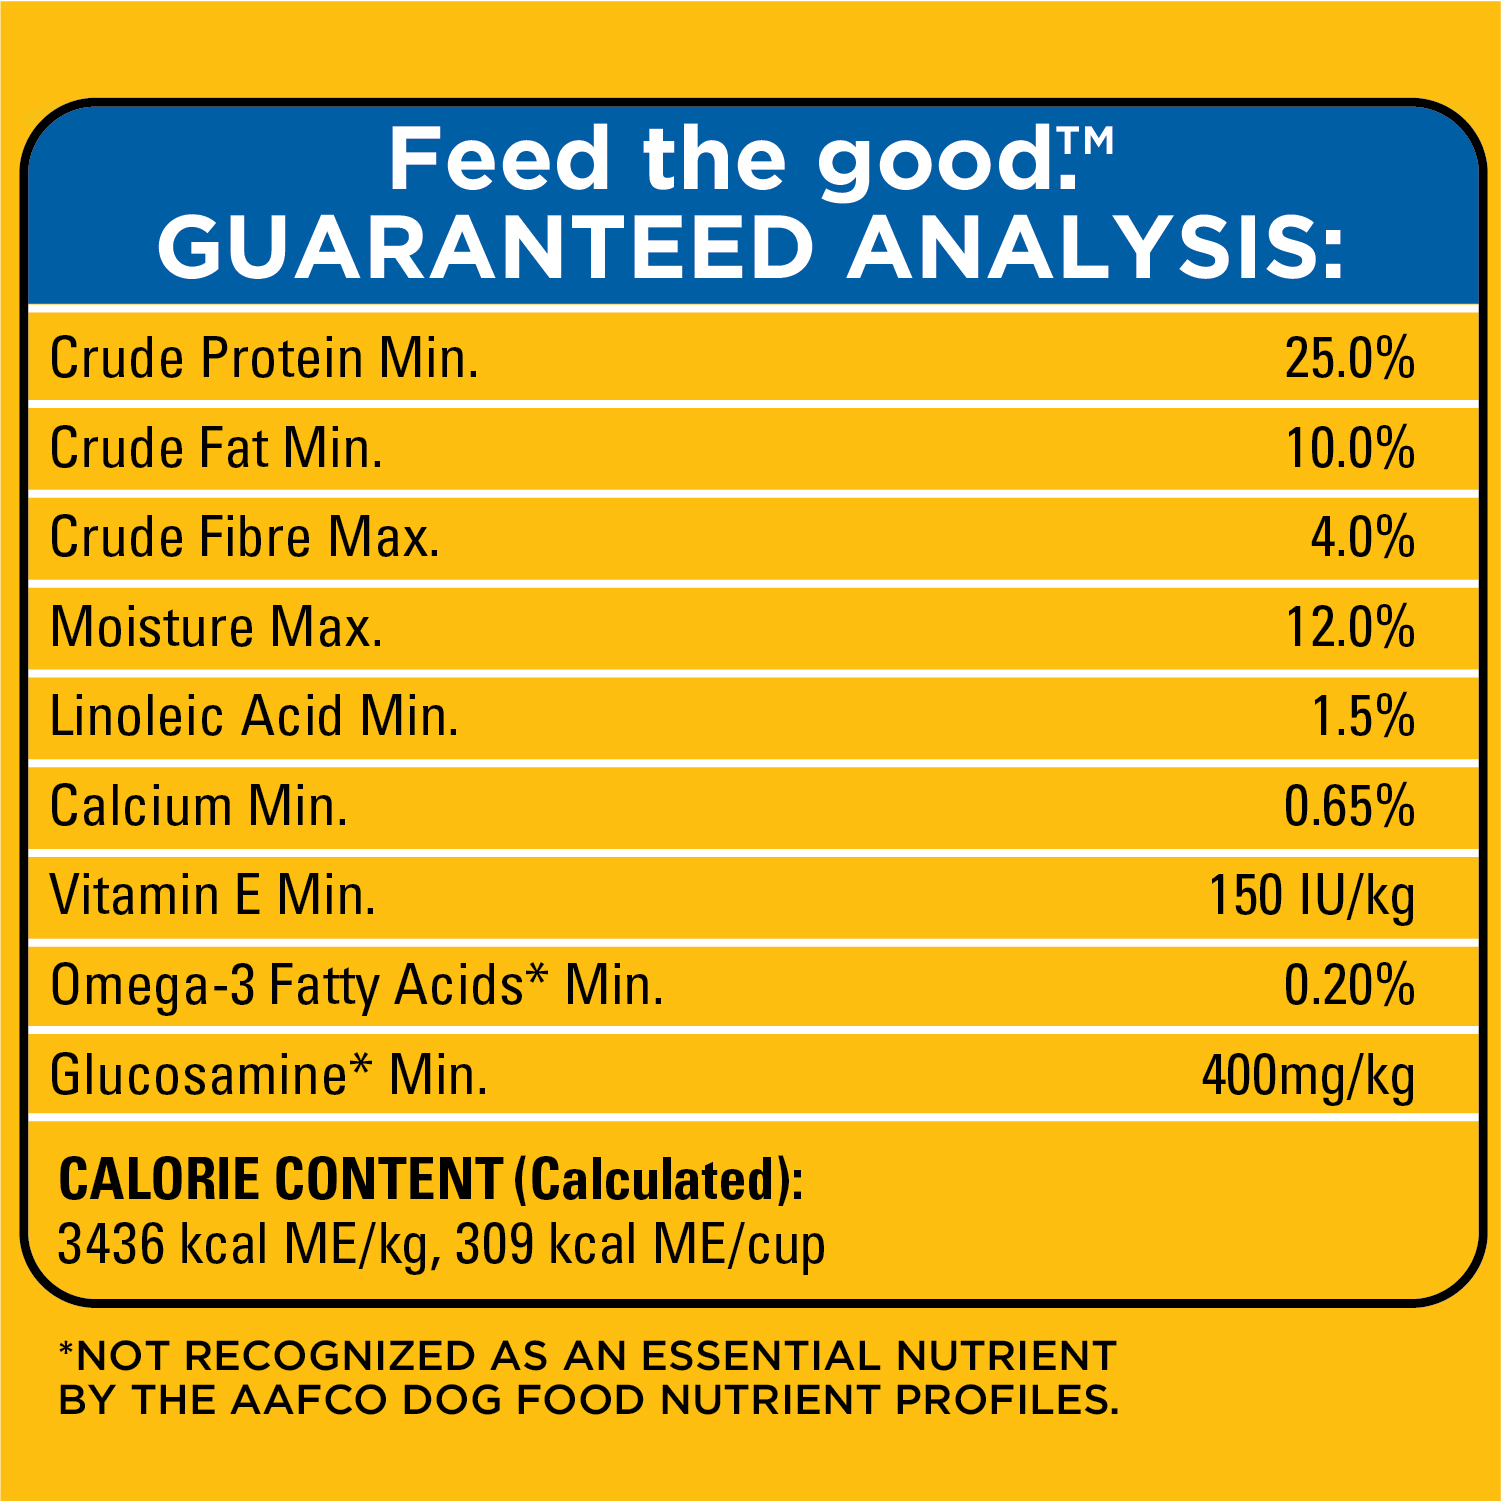 PEDIGREE® SMALL DOG+ ROASTED CHICKEN & VEGETABLE FLAVOUR MATURE ADULT DRY DOG FOOD guaranteed analysis image